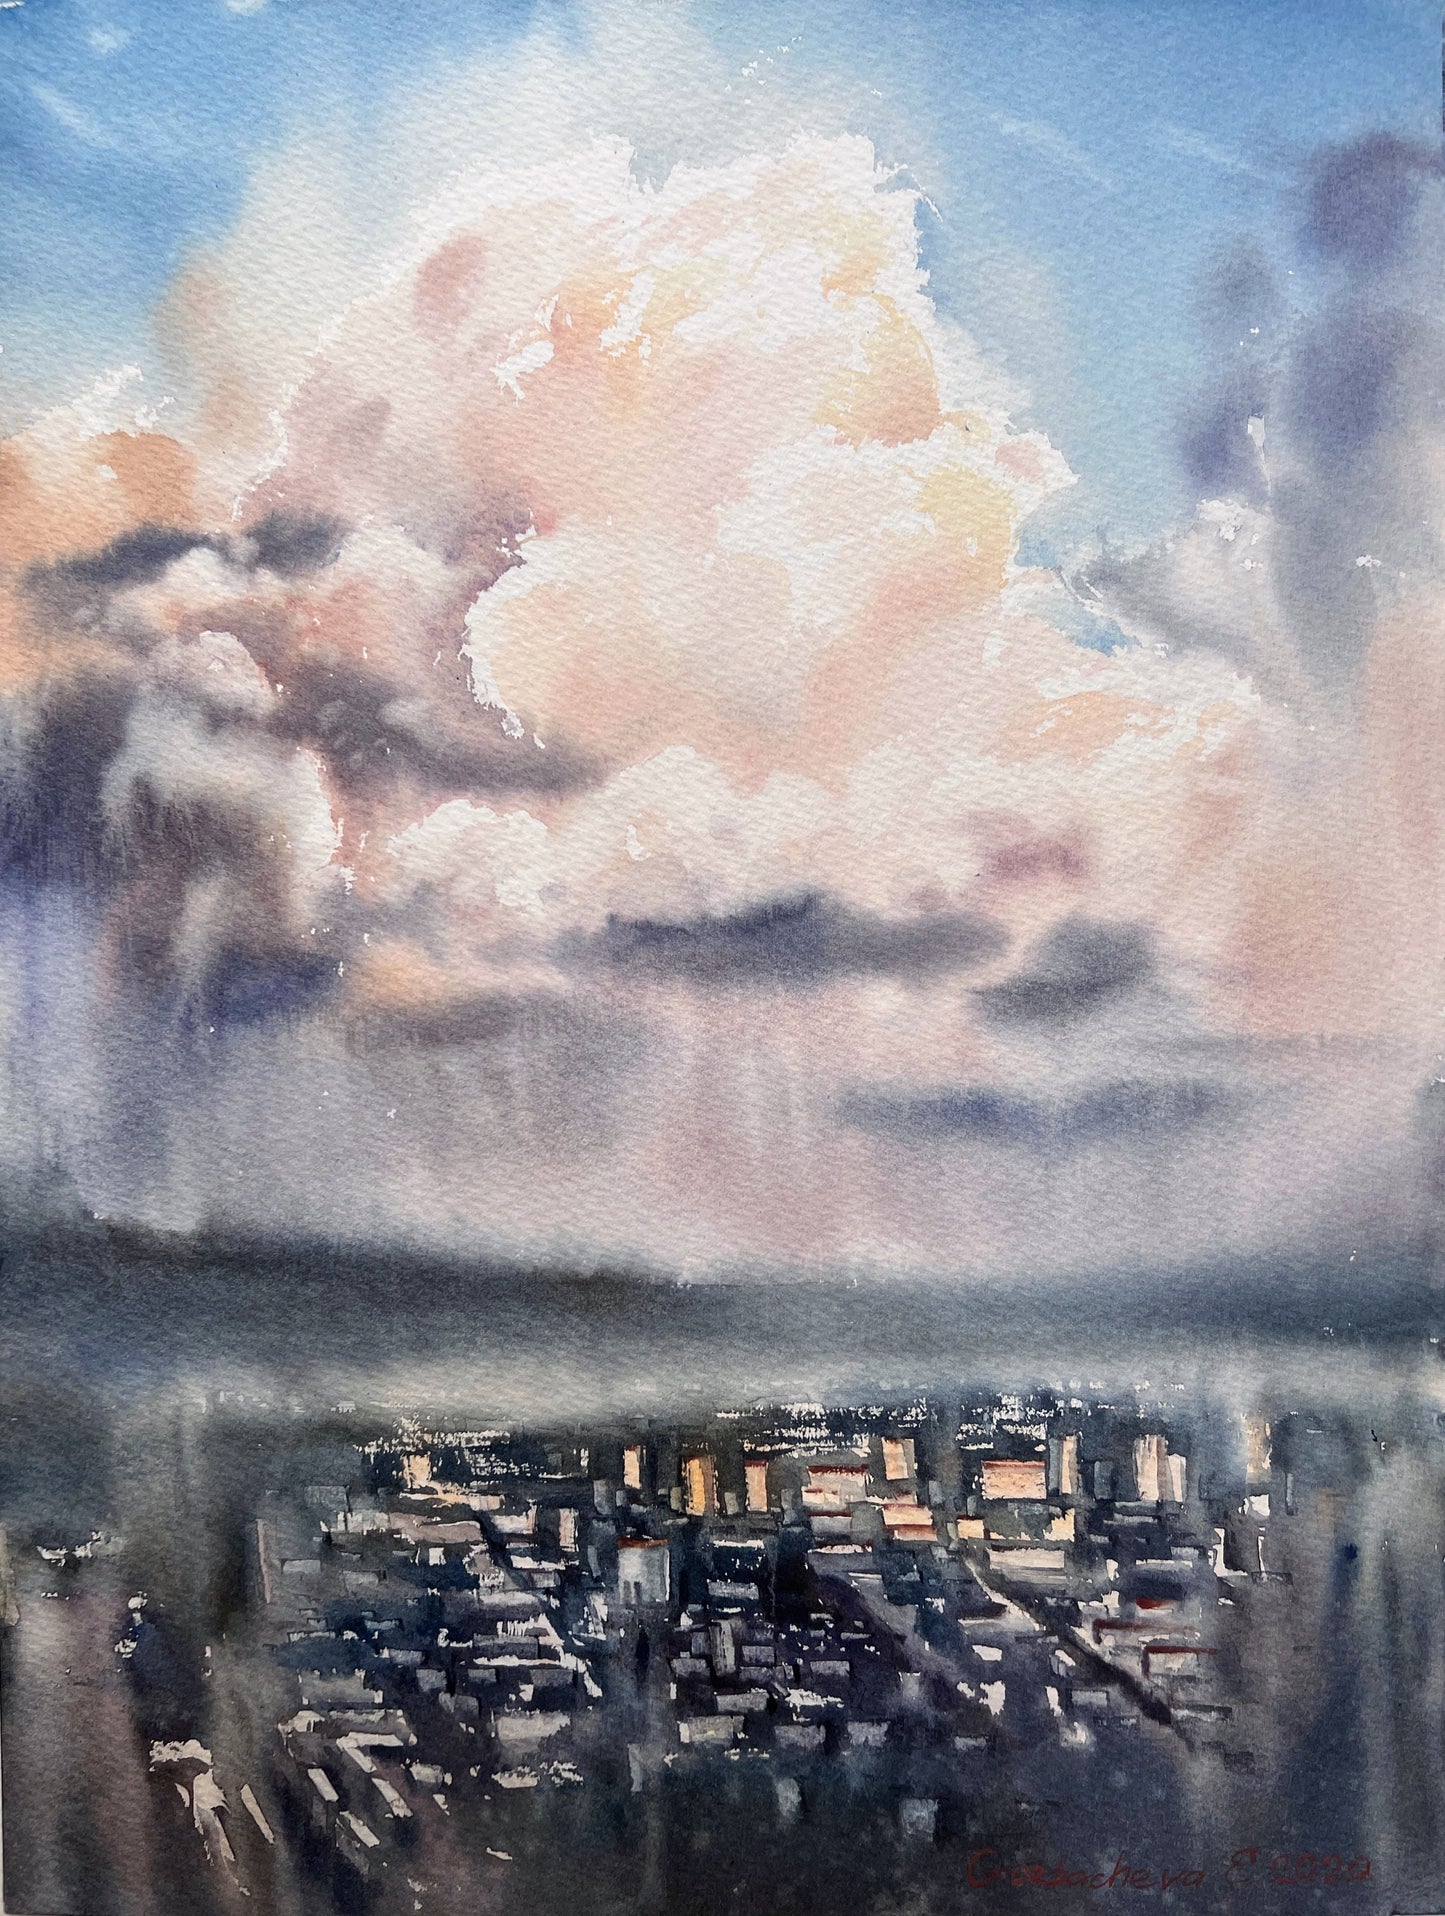 Cyberpunk Painting Original, Watercolor City Above The Cloud, Rainy Clouds, Cityscape Wall Art Decor, Gift